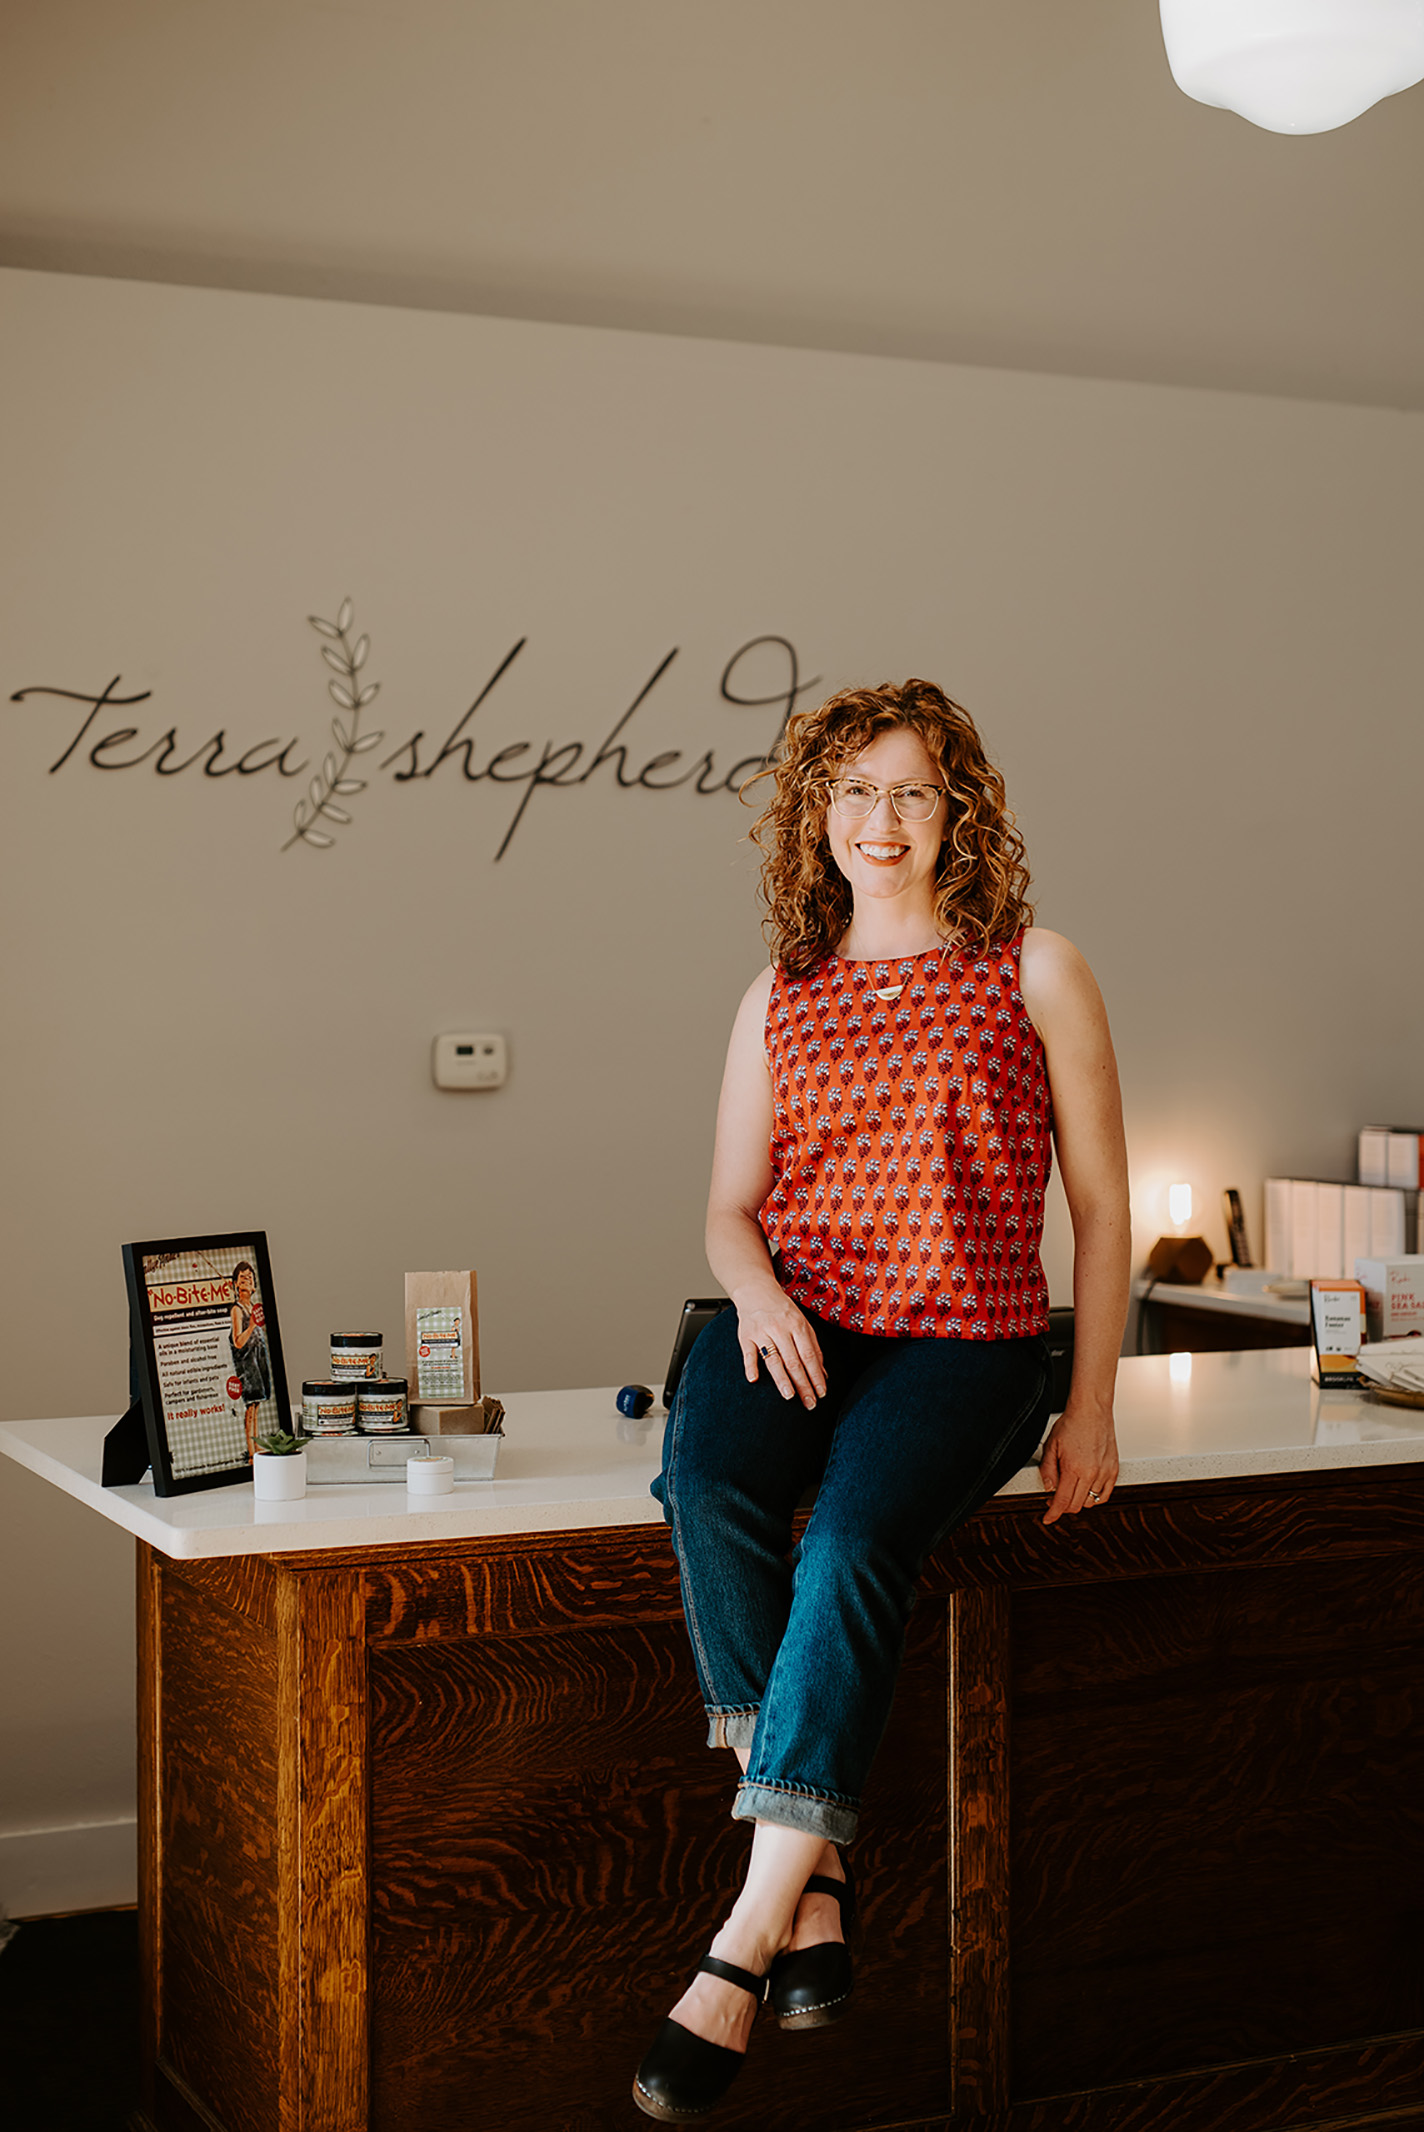 Sara Jamison at her downtown Sioux Falls small business, Terra Shepherd